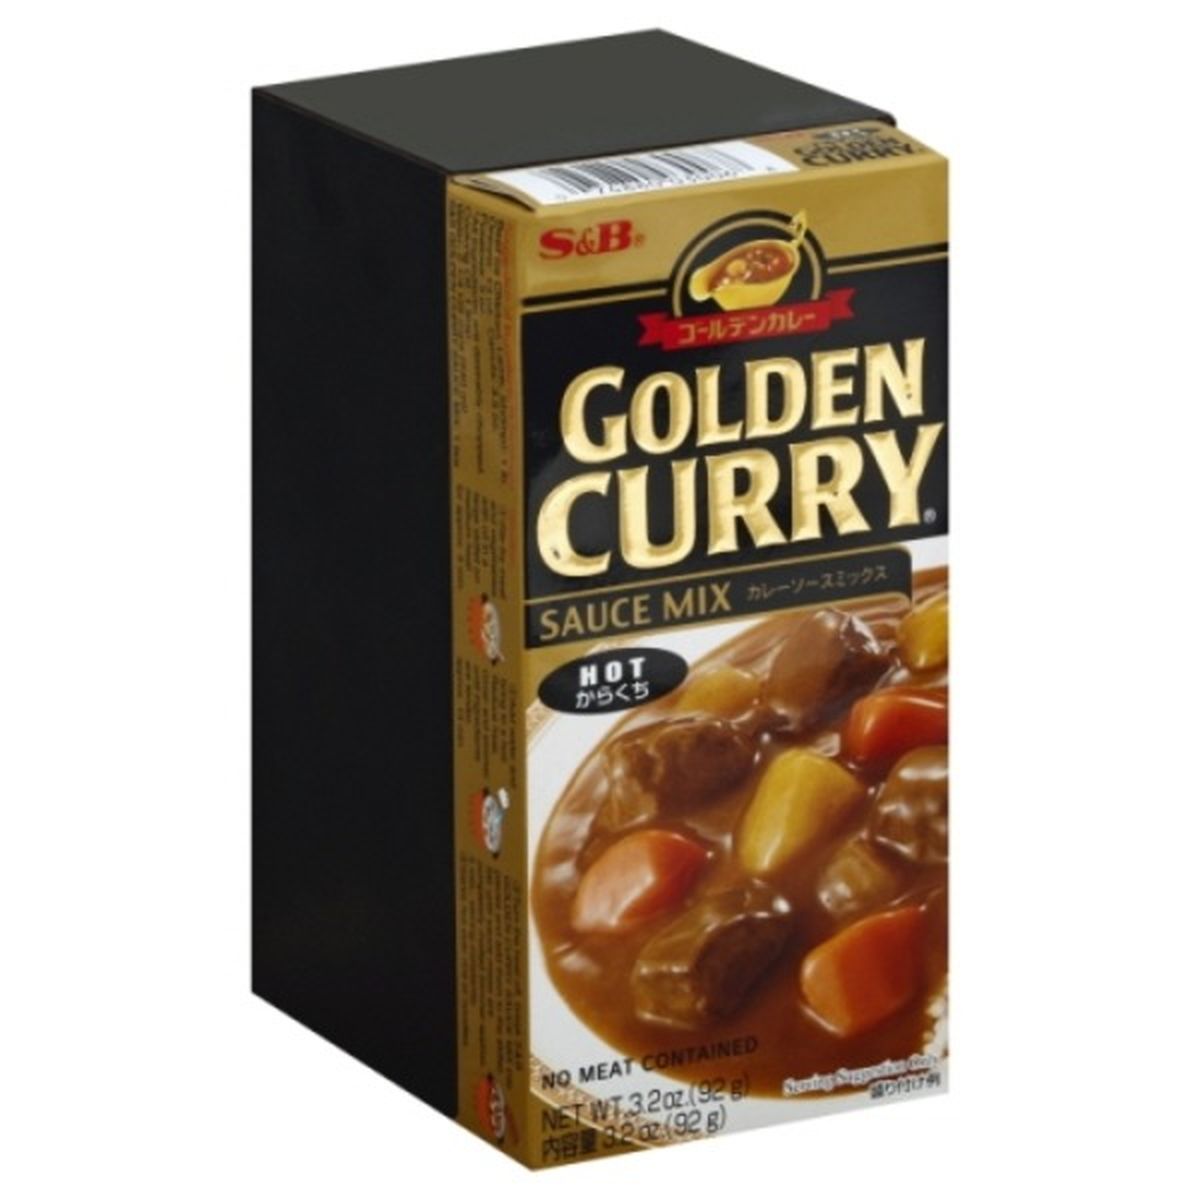 Calories in S&b Sauce Mix, Golden Curry, Hot